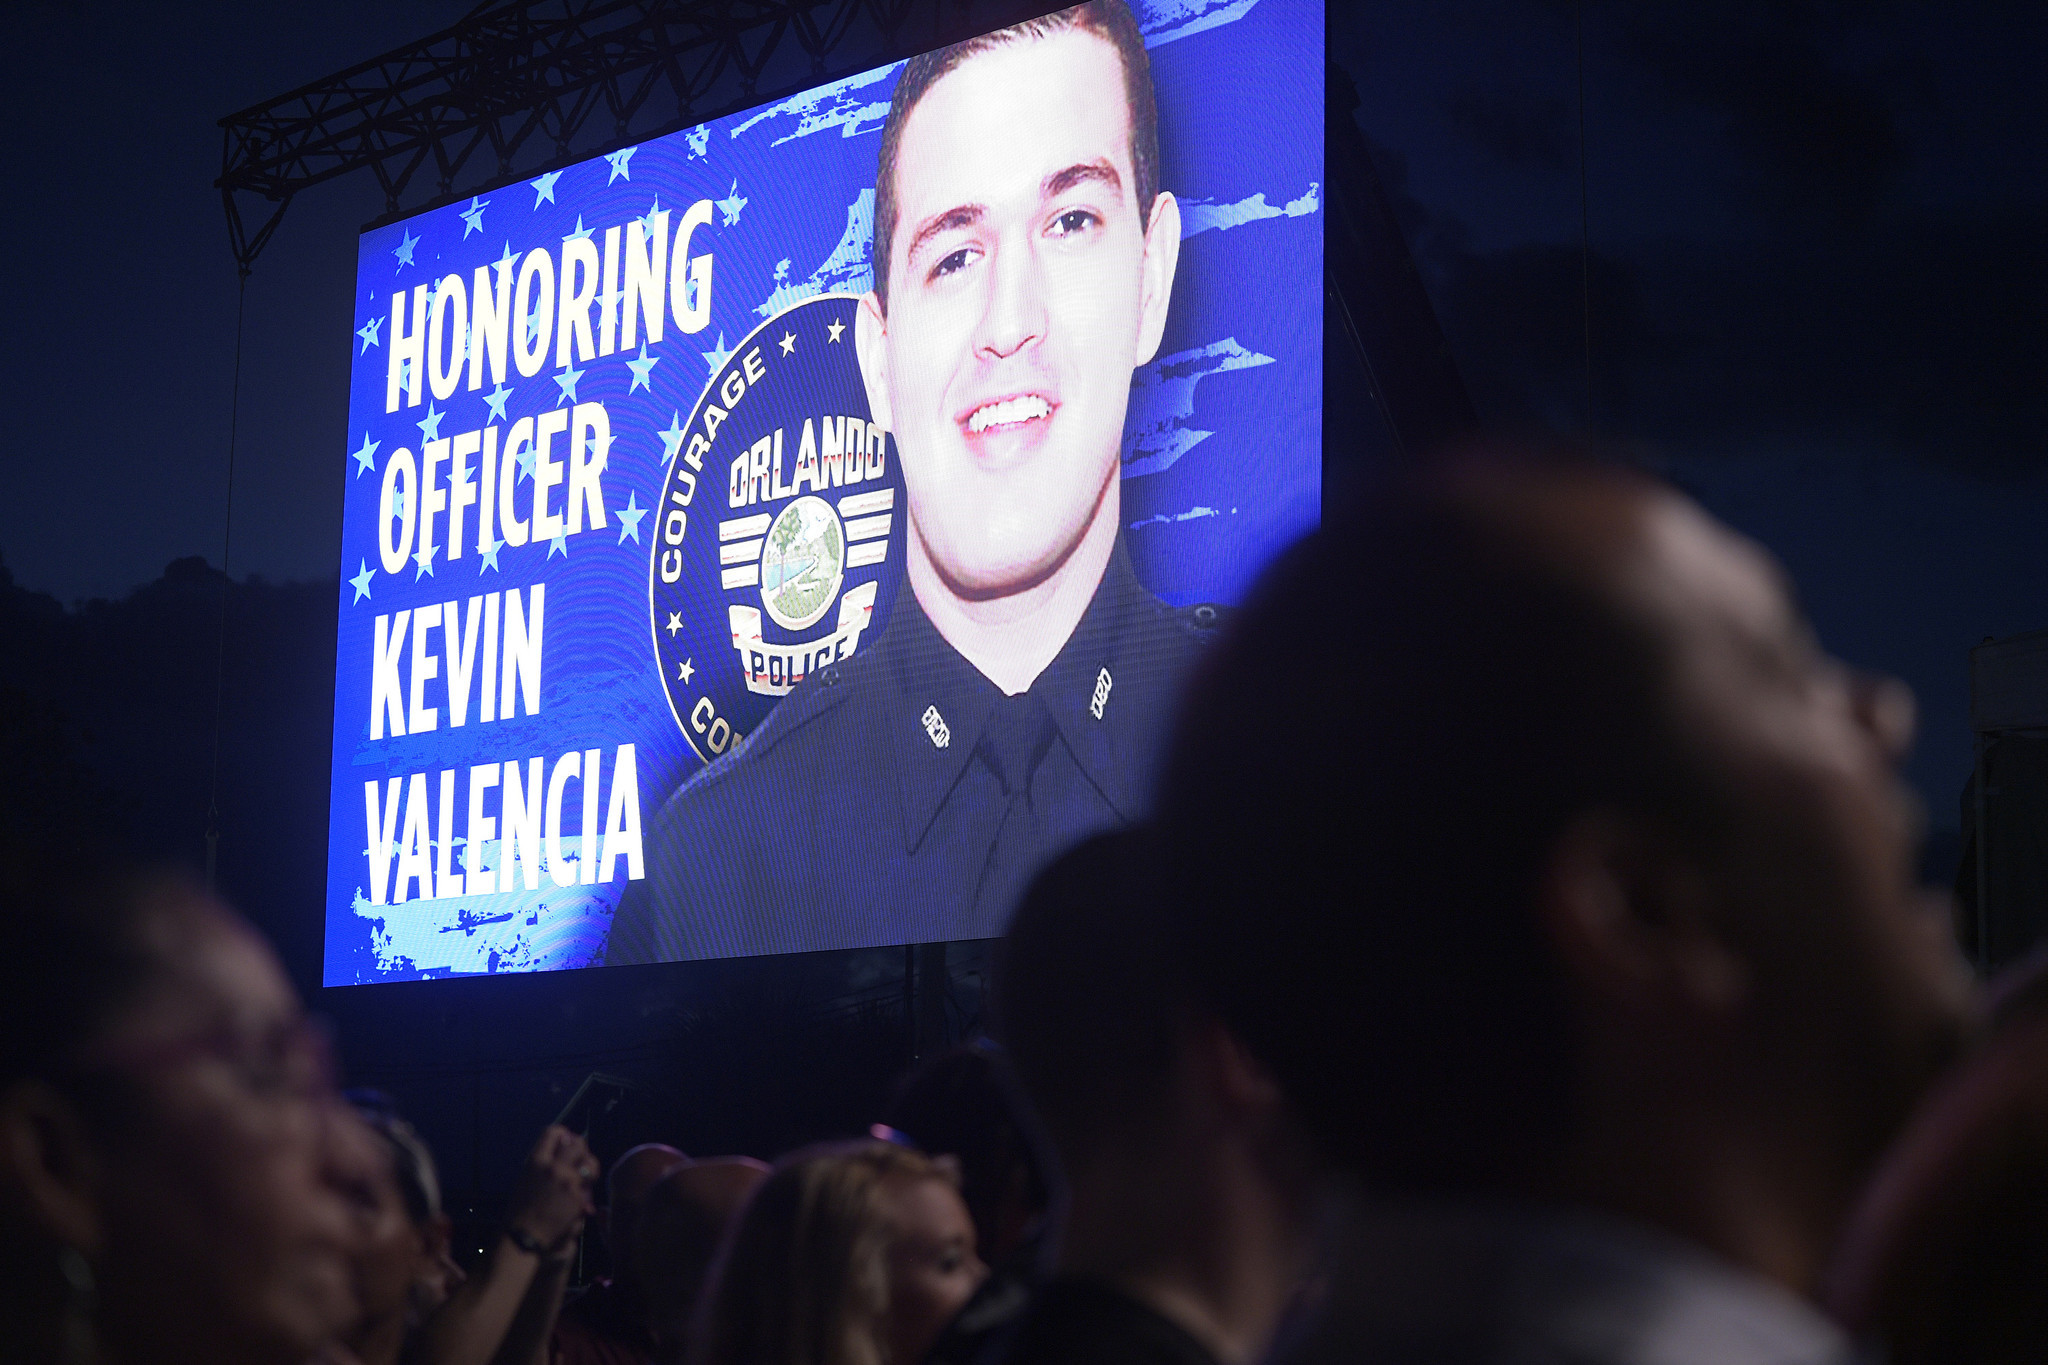 A photo of Kevin Valencia is show on a video monitor during the free concert event, benefiting Orlando Police Department officer Kevin Valencia Saturday, June 1, 2019, in Orlando, Fla. (Phelan M. Ebenhack for the Orlando Sentinel)